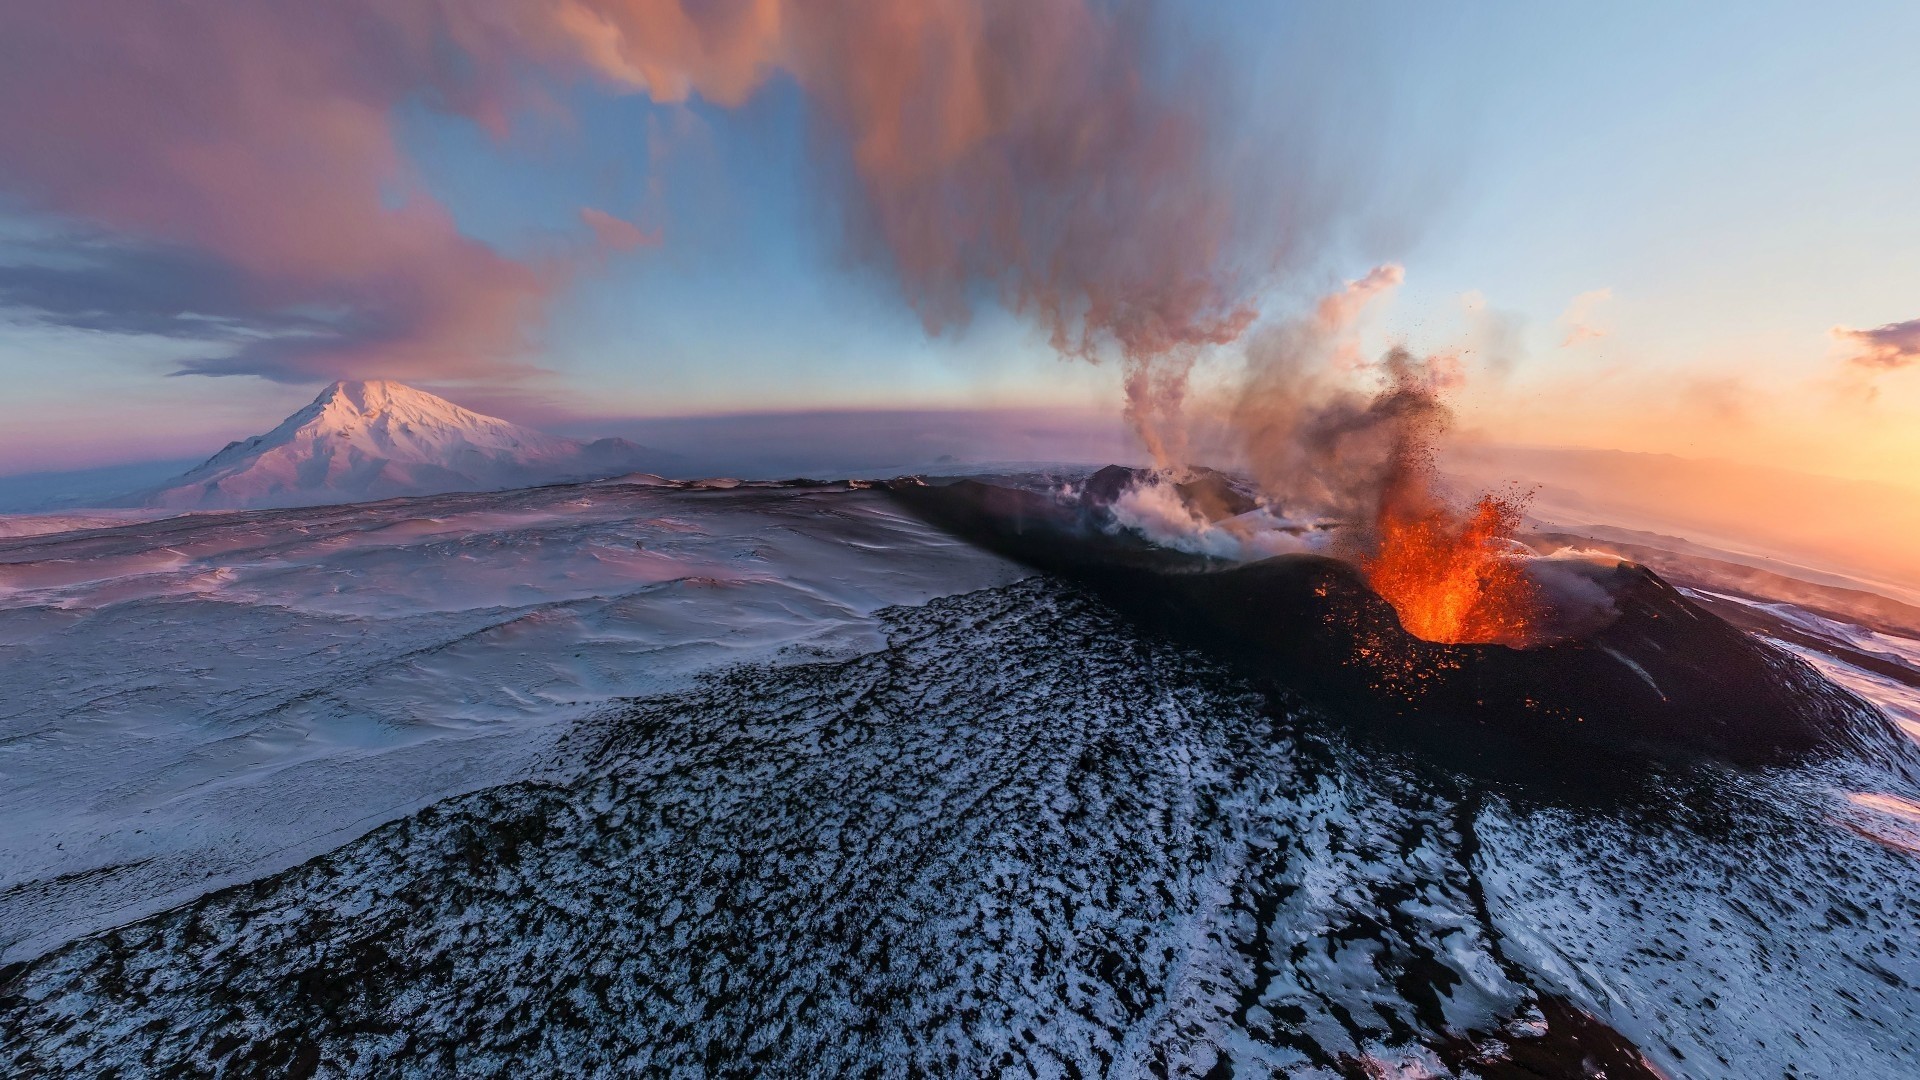 Volcano Mountains Winter Snow Lava Clouds Nature Landscape Eruption Kamchatka Russia Sunset Aerial V 1920x1080